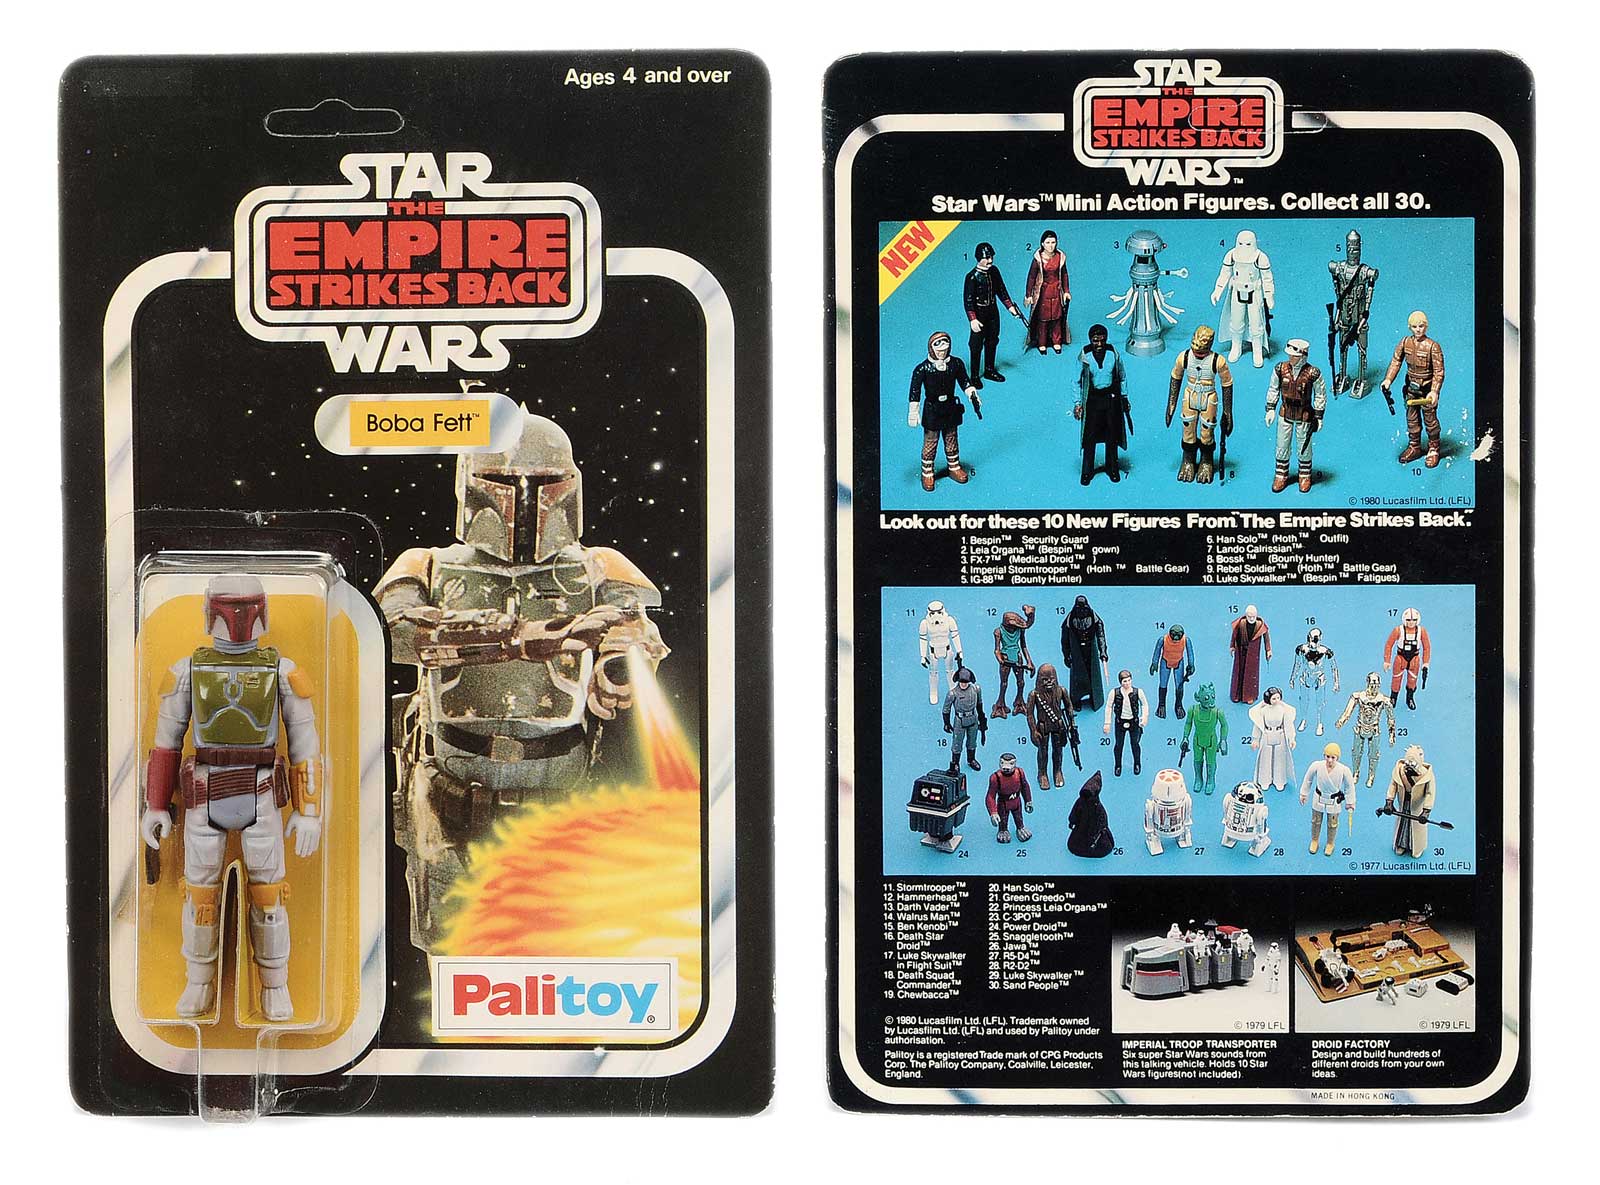 A 30B back Boba Fett on a Palitoy Star Wars The Empire Strikes Back with un-punched card